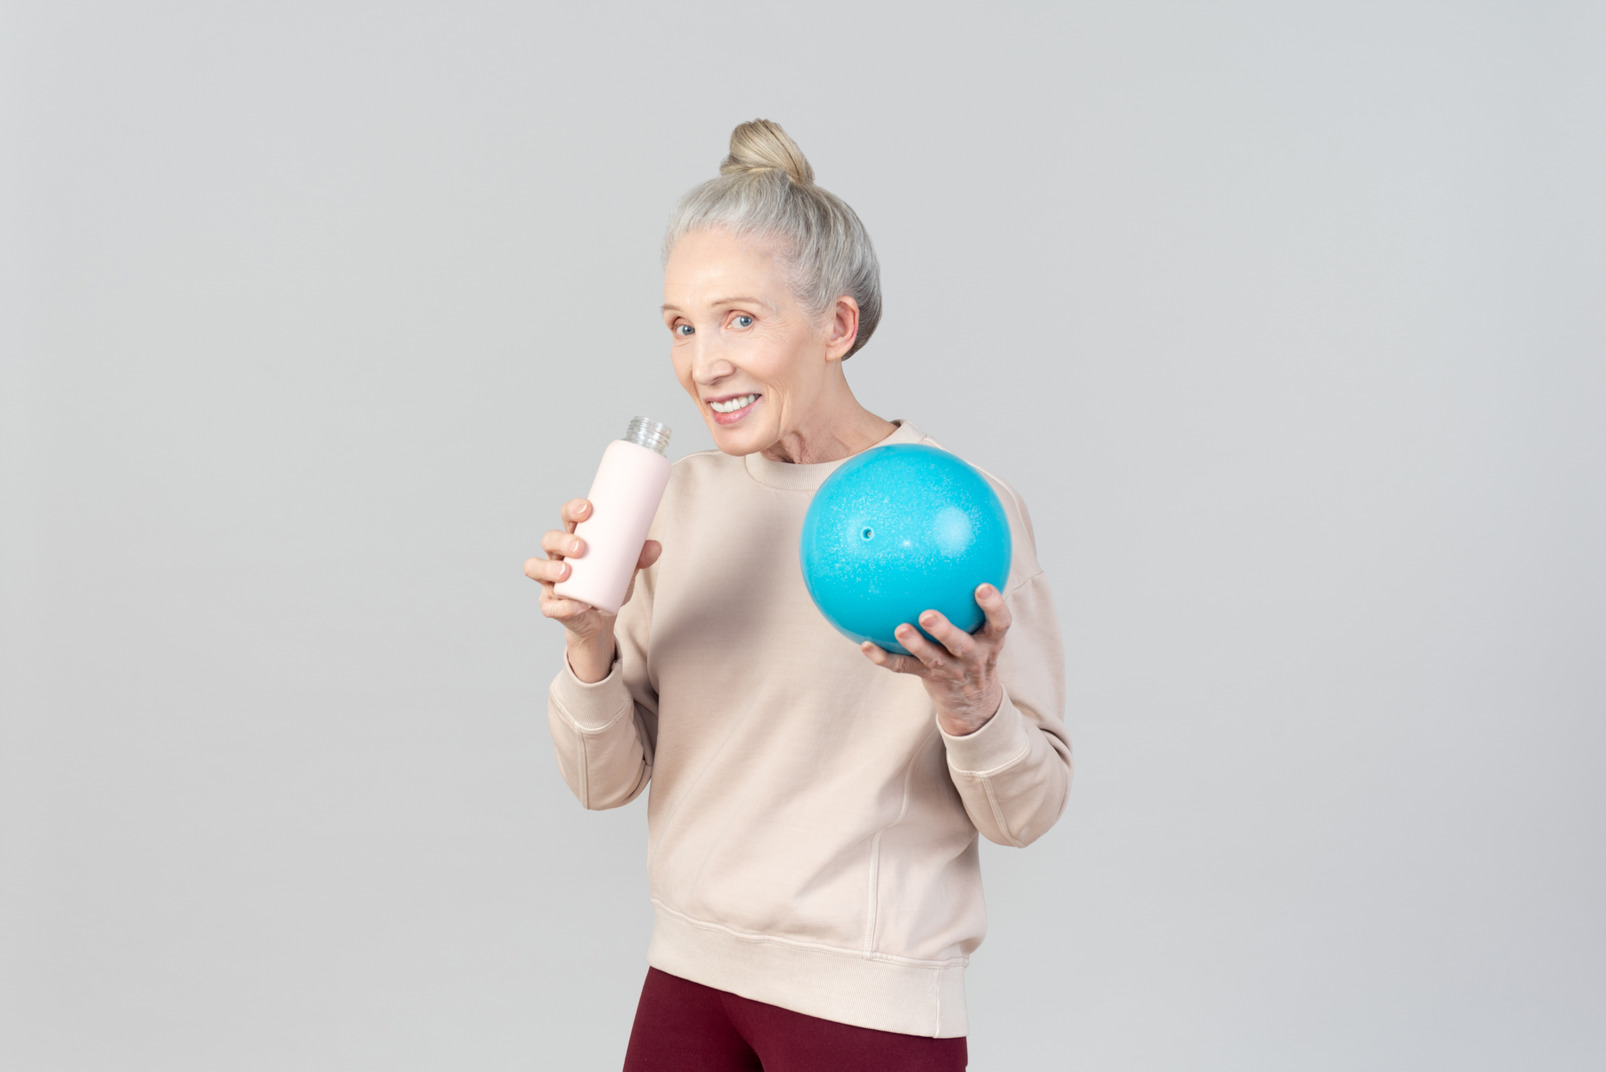 Old woman holding light blue ball and sports bottle